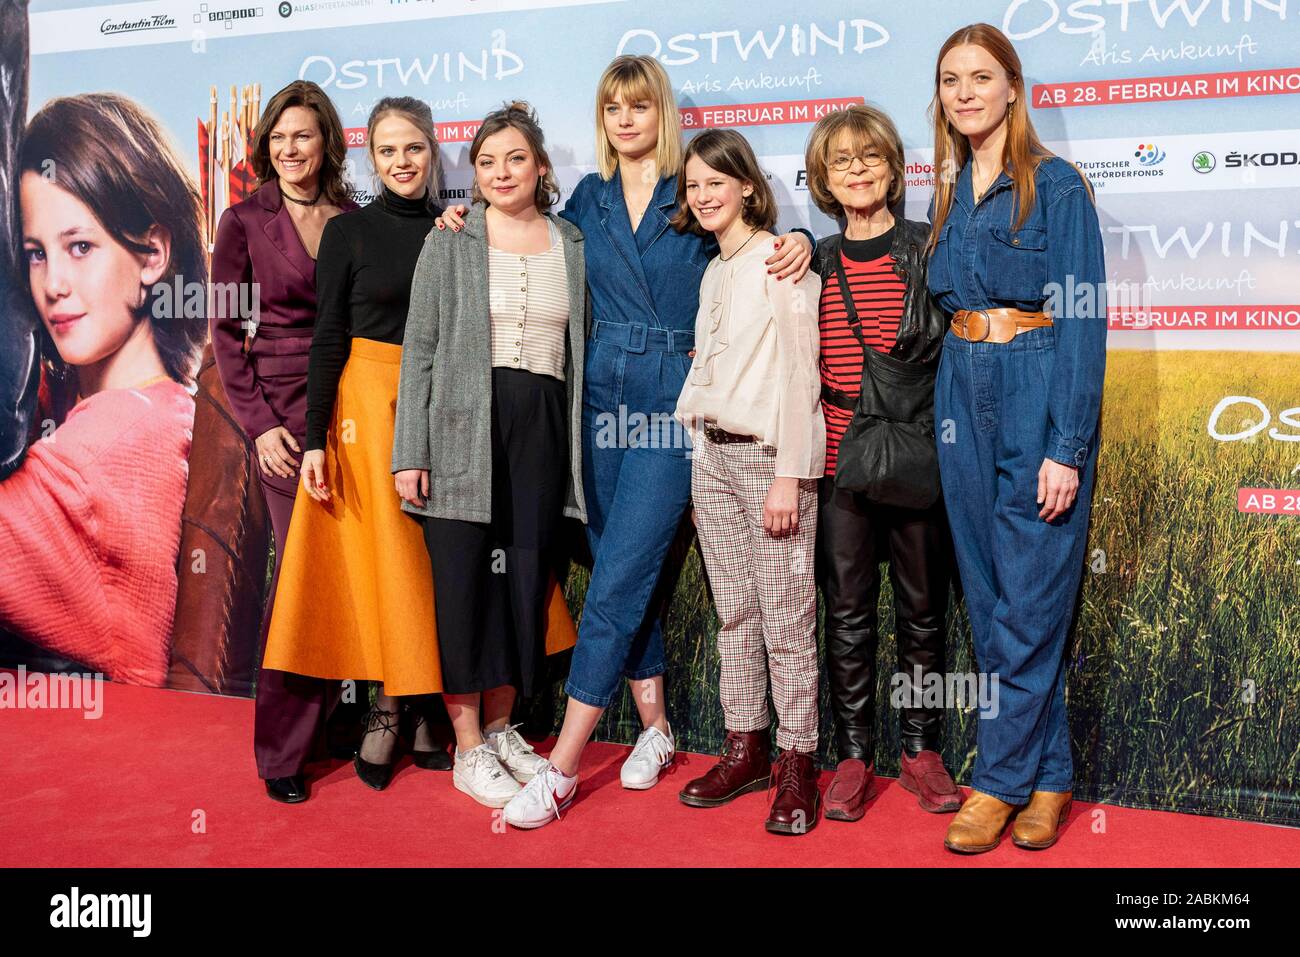 (l-r) The actors Nina Kronjäger, Lili Epply, Amber Bonnard, Hanna Binke, Luna Paiano, Cornelia Froboess, Sabin Tambrea, Marvin Linke from the film 'Ostwind - Aris Ankunft' pose on the red carpet with director Theresa von Eltz on Sunday, February 18, 2019 in Equilaland in Munich (Upper Bavaria). [automated translation] Stock Photo